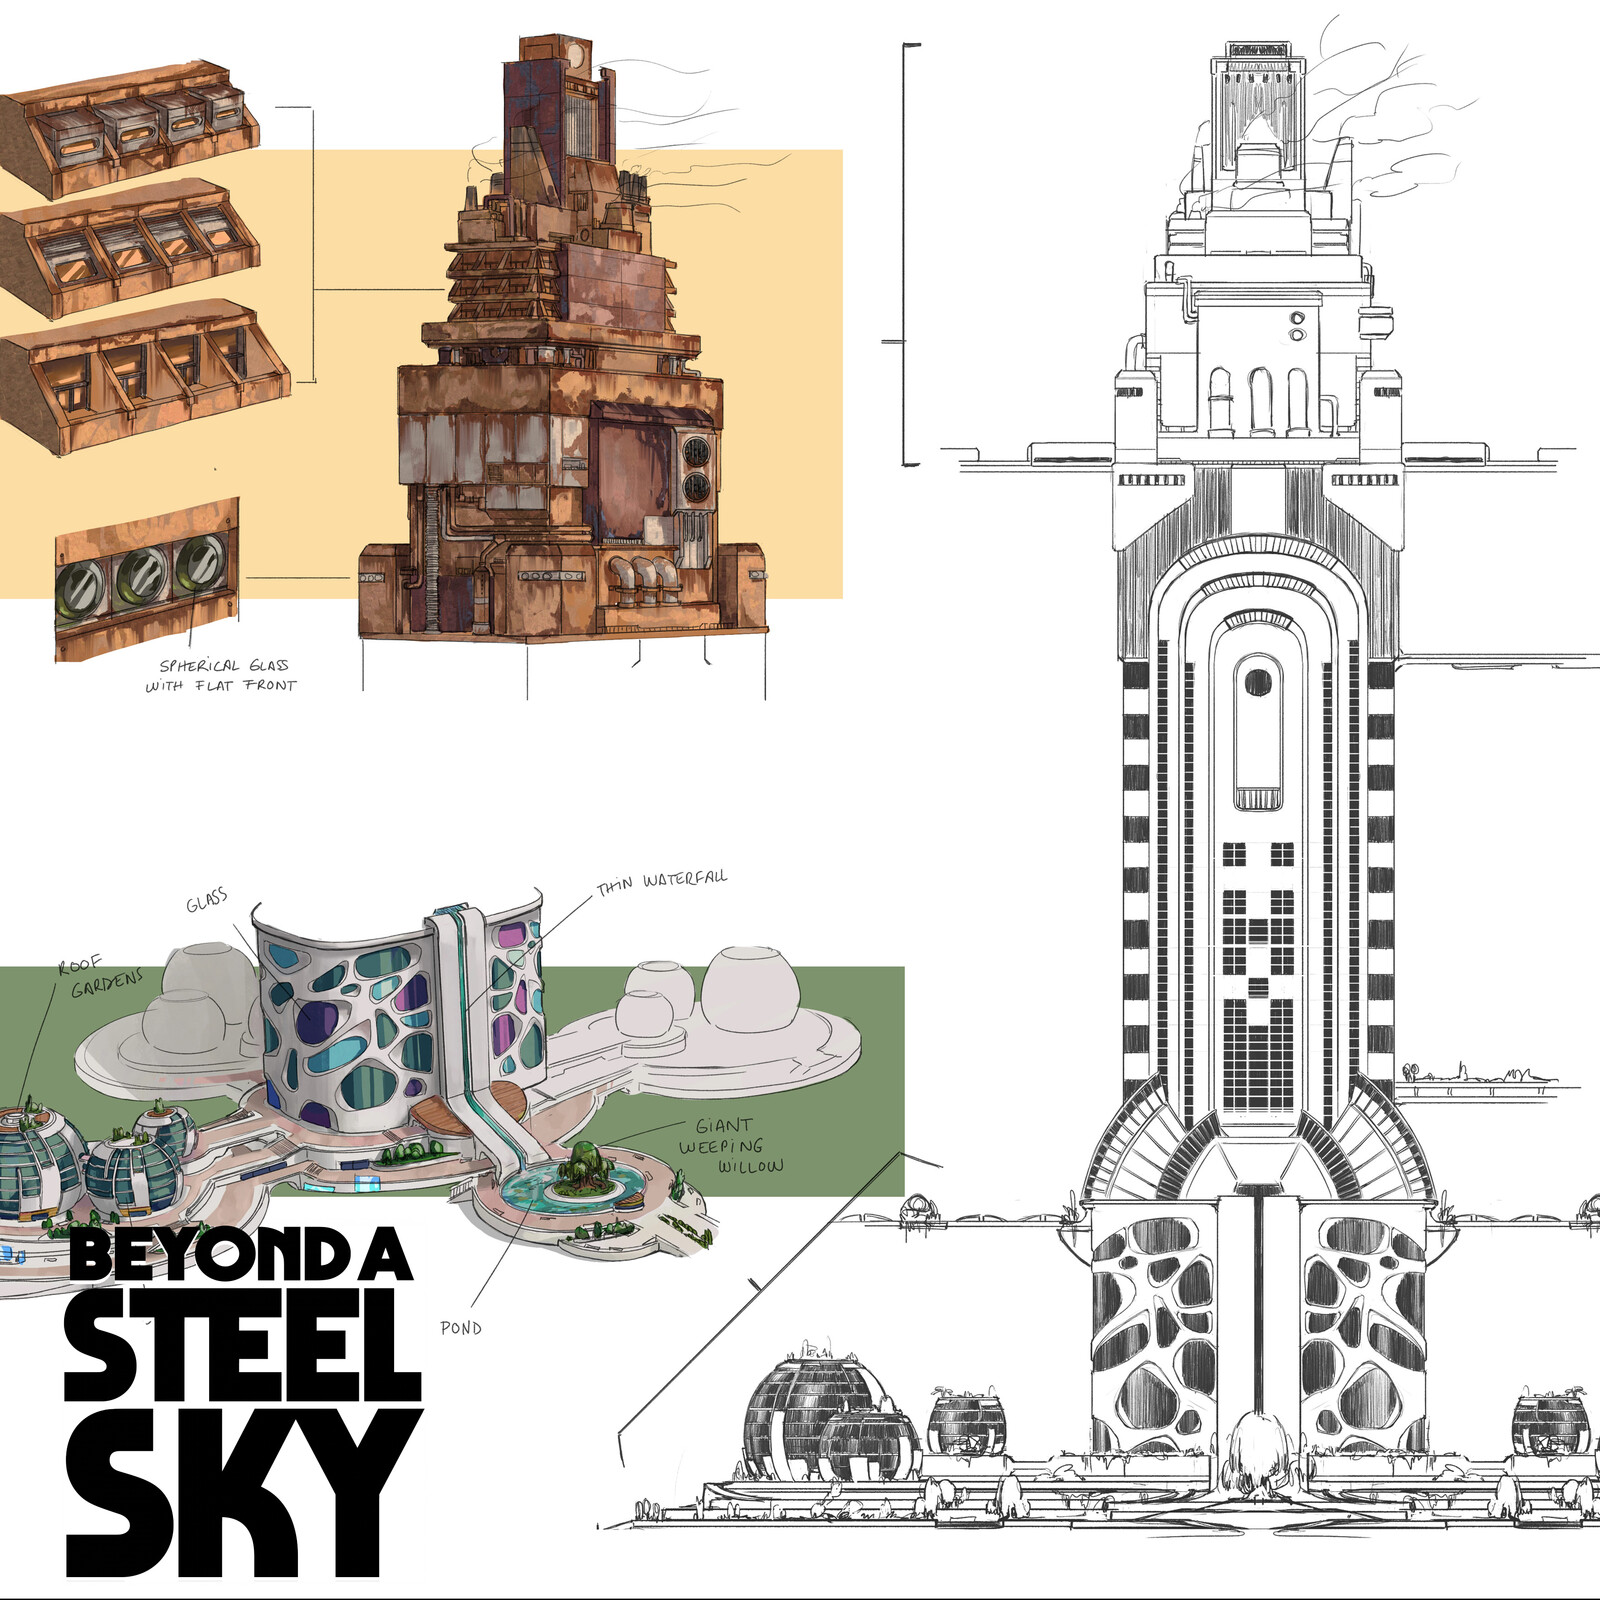 BEYOND A STEEL SKY: Union City Towers and paths_02